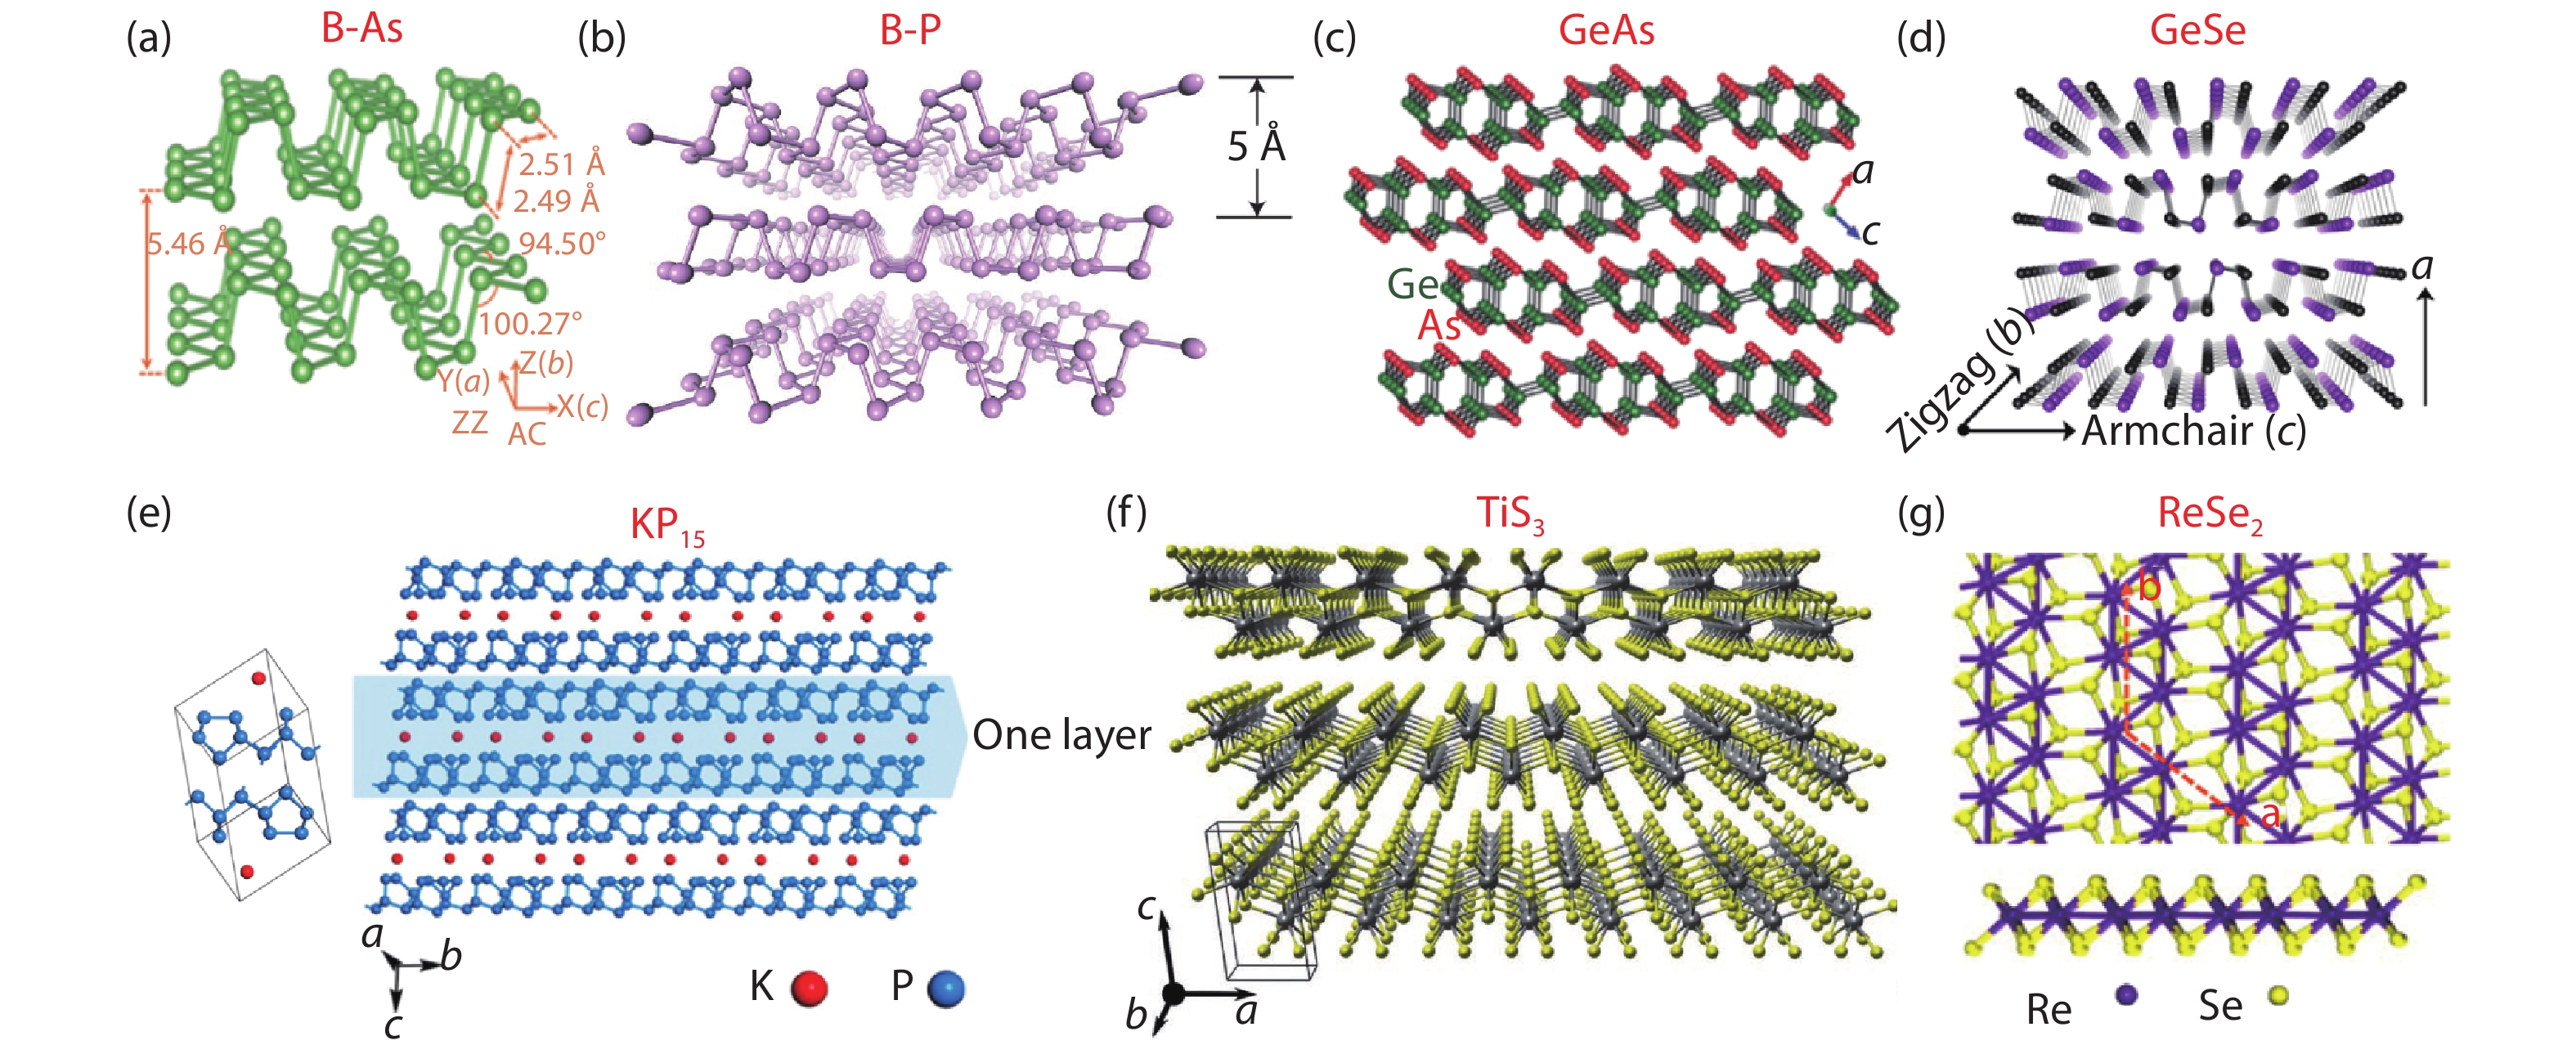 (Color online) Crystal structures of two-dimensional anisotropic materials, including (a) orthorhombic black-arsenic. Reproduced with permission[35]. Copyright 2018, John Wiley and Sons. (b) Orthorhombic black-phosphorus. Reproduced with permission[46]. Copyright 2014, Springer Nature. (c) Monoclinic GeAs. Reproduced with permission[47]. Copyright 2018, John Wiley and Sons. (d) Orthorhombic GeSe. Reproduced with permission[41]. Copyright 2017, American Chemical Society. (e) Triclinic KP15. Reproduced with permission[45]. Copyright 2018, American Chemical Society. (f) Monoclinic TiS3. Reproduced with permission[48]. Copyright 2018, Wiley-VCH. (g) Triclinic ReSe2. Reproduced with permission[49]. Copyright 2016, American Chemical Society.